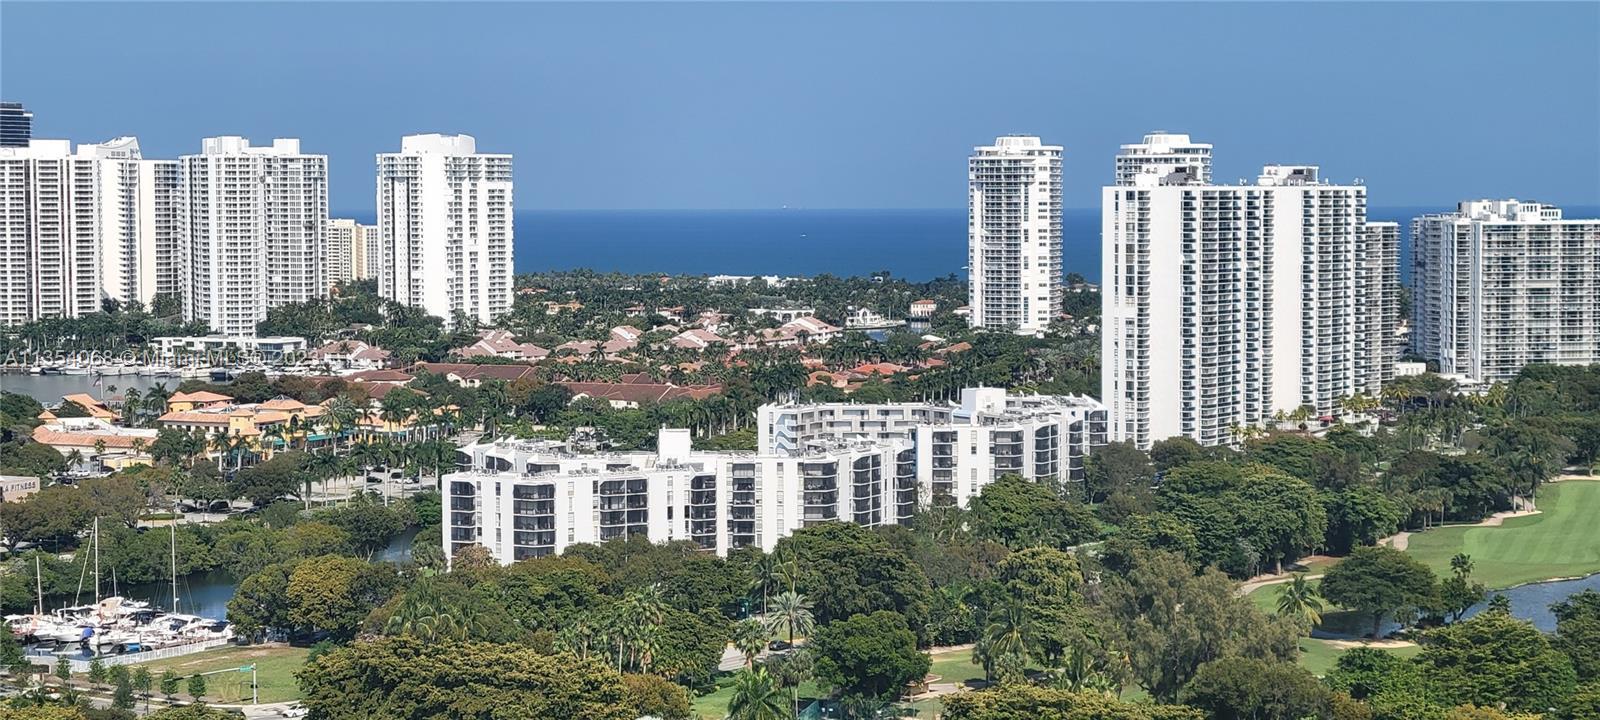 Live the chic life! A fabulous Aventura penthouse w/amazing water, city & golf course views. This up